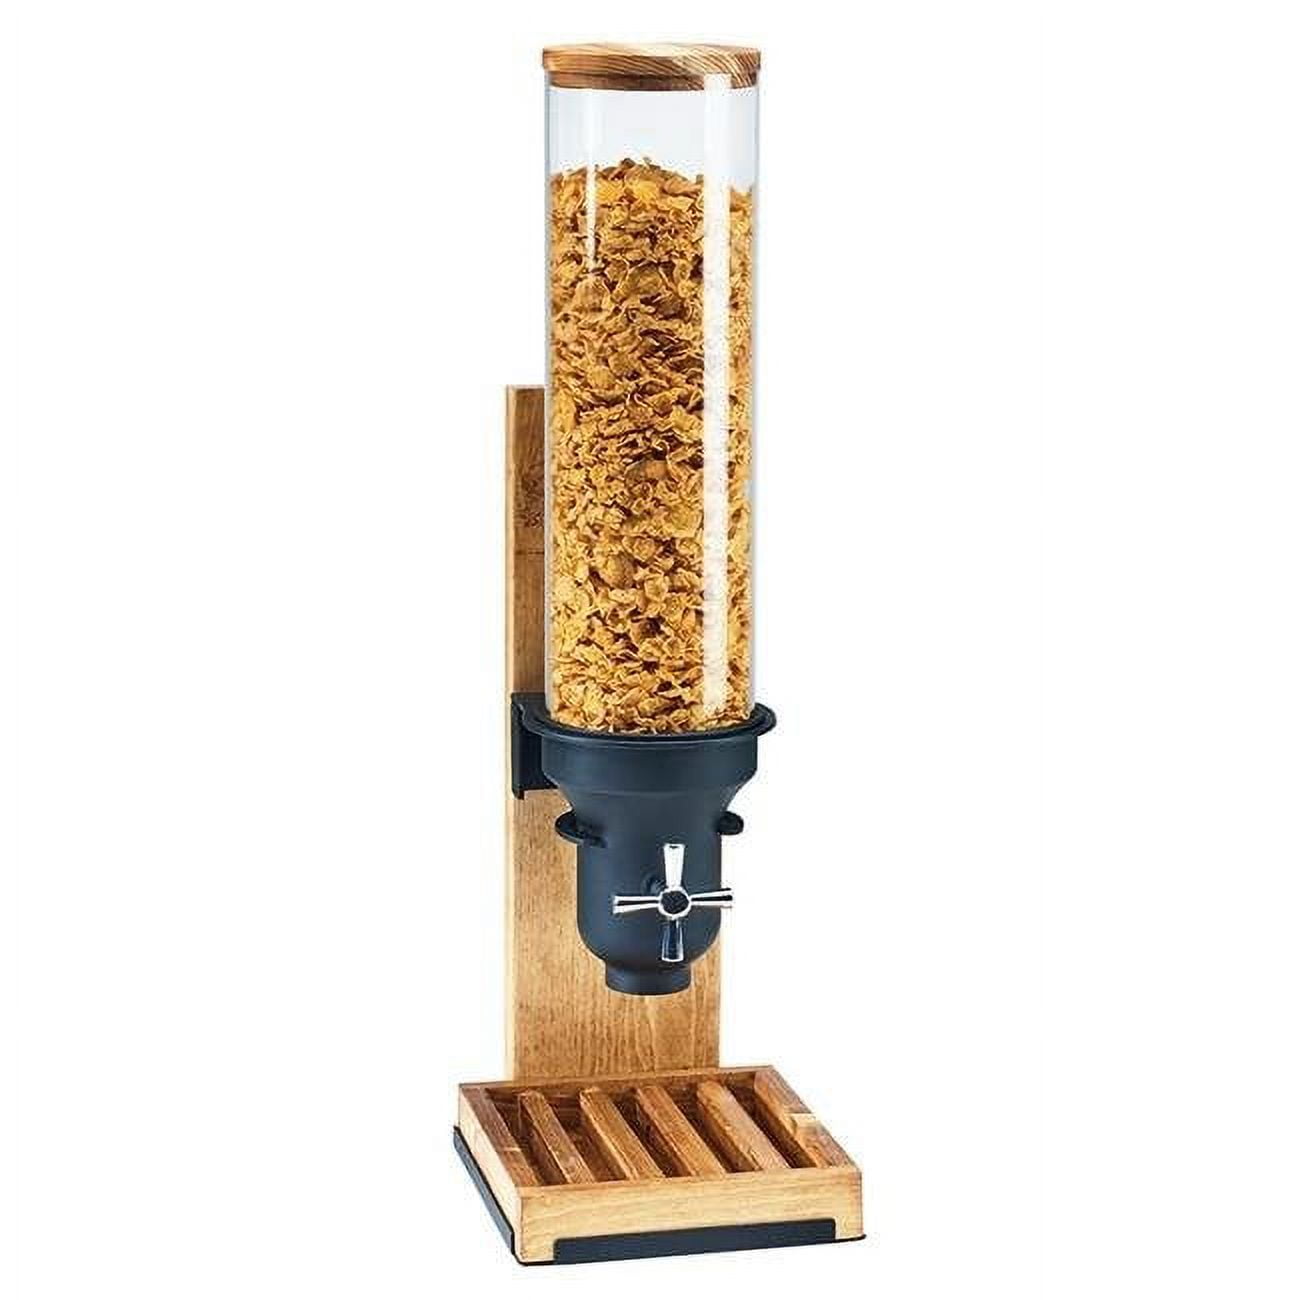 3584-1-99 4.5 Ltr Madera Cereal Dispenser - 8 X 9.5 X 26.5 In.